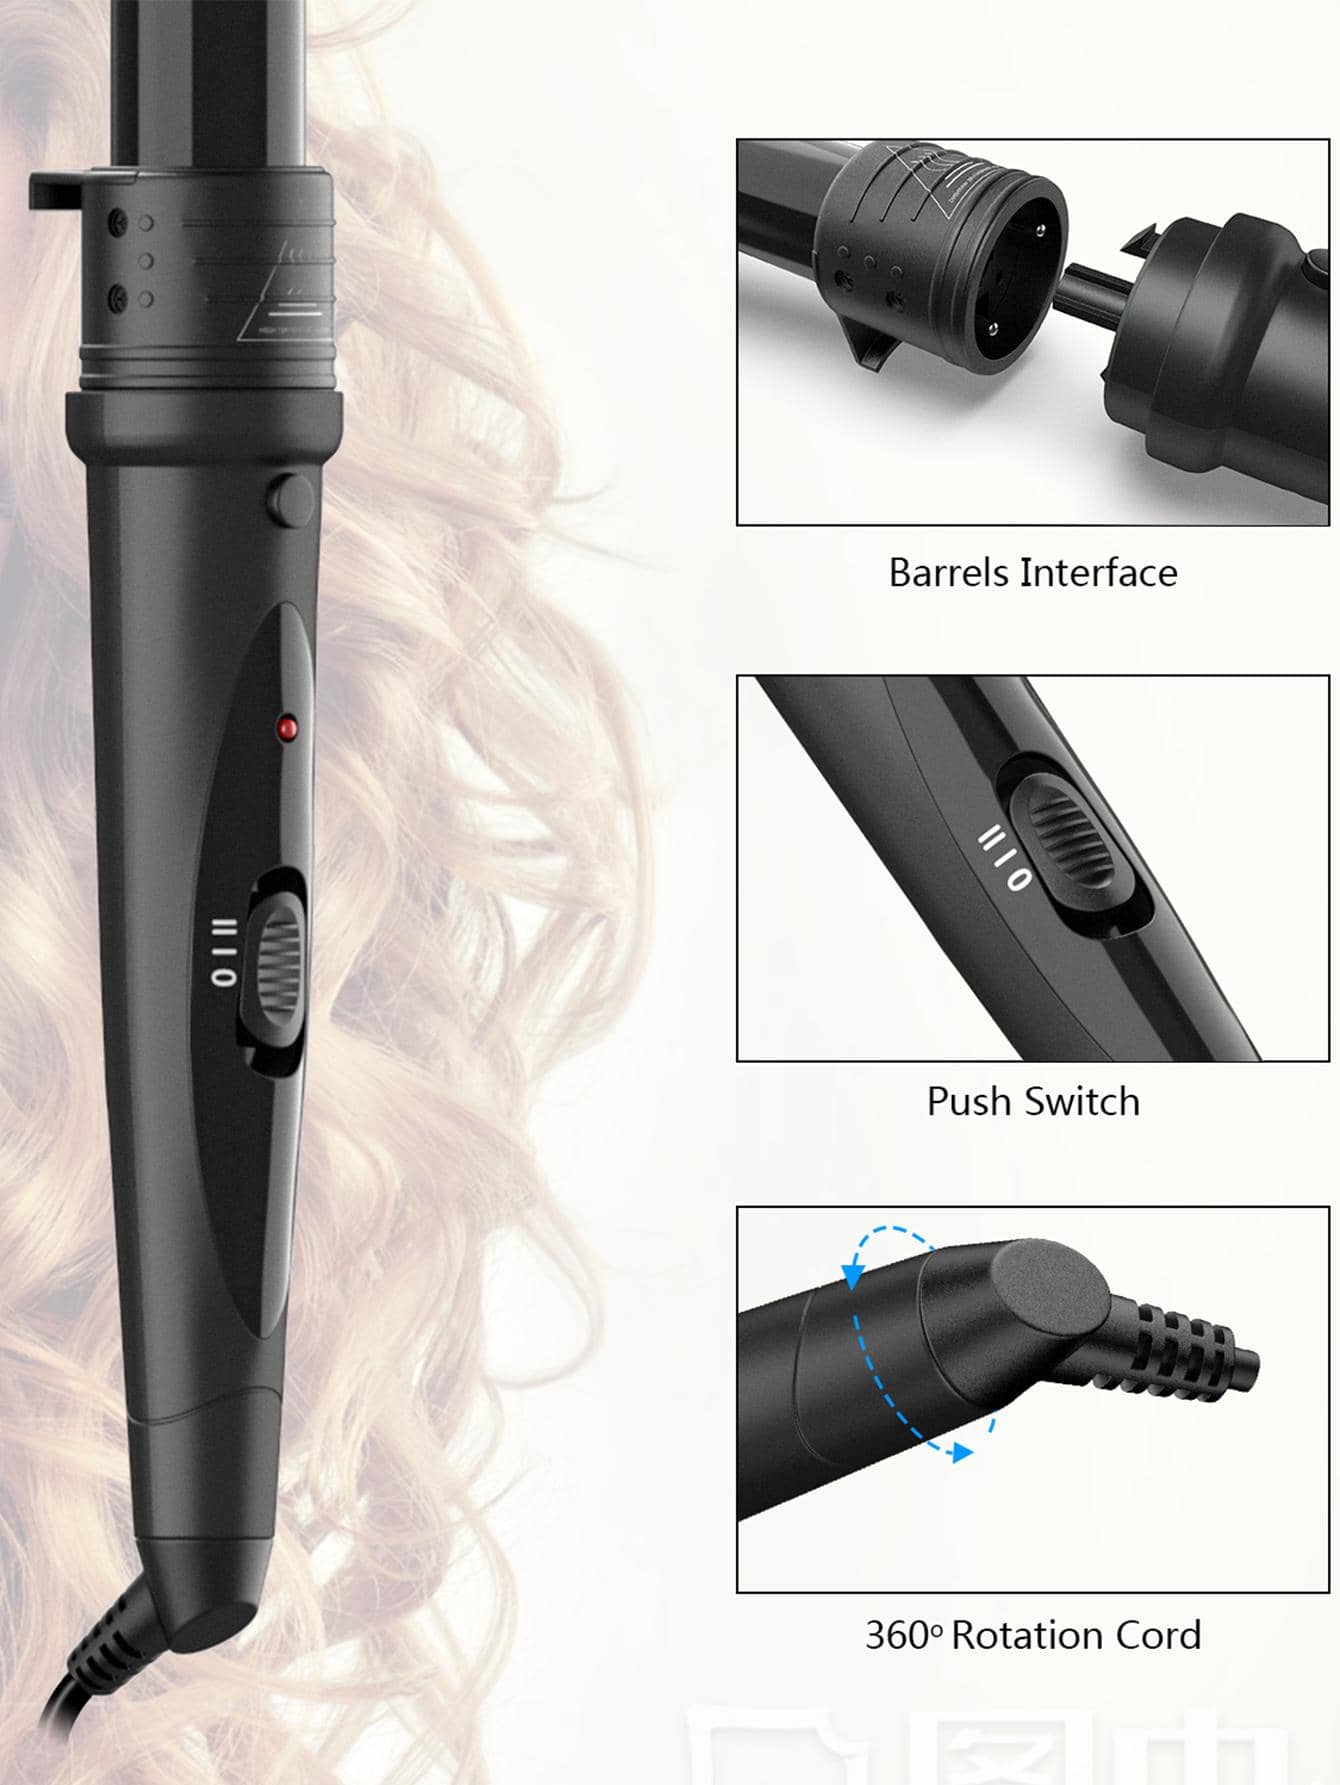 1set 5 In 1 Curling Iron, Upgrade Curling Wand, 0.35 To 1.25 Inch Interchangeable